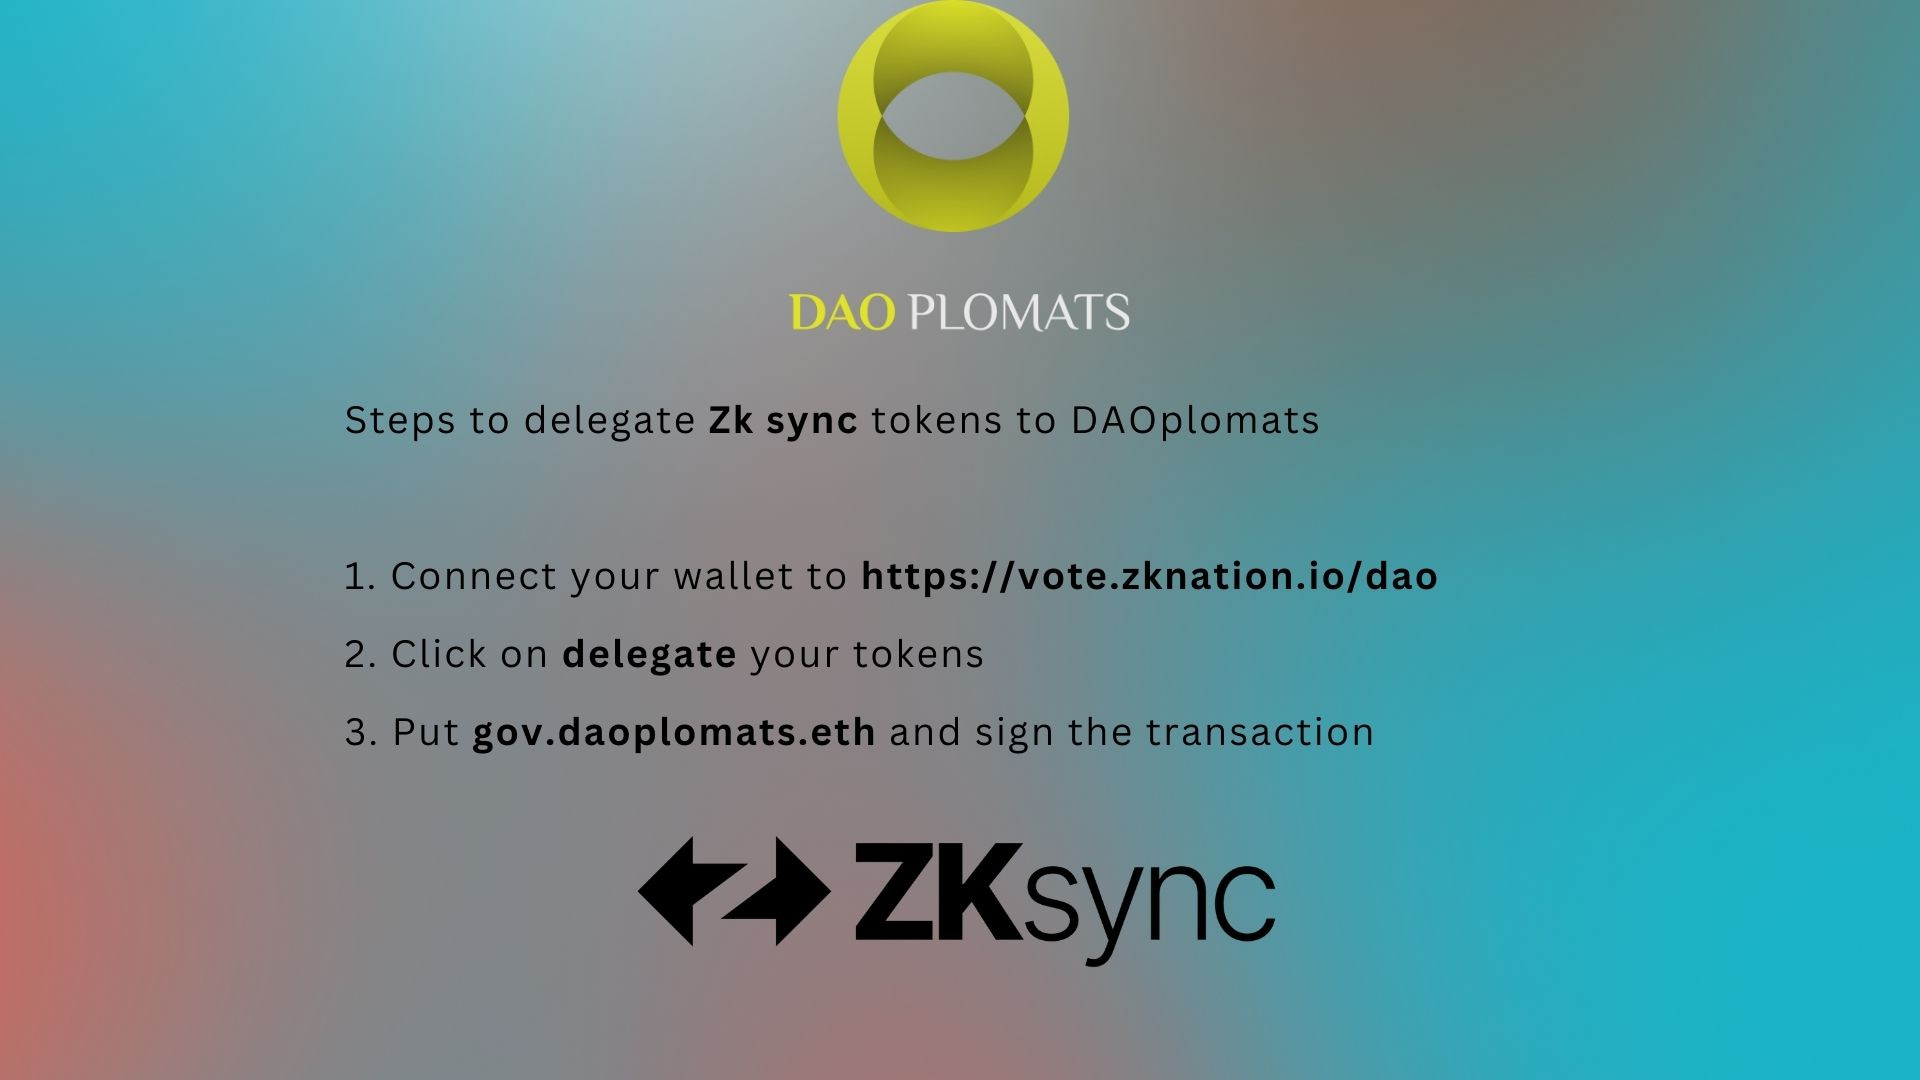 Steps_to_delegate_Zk_sync_tokens_to_DAOplomats_1._Connect_your_wallet_to_httpsvote.zknation.iodao_2._Click_on_delegate_your_tokens_3._Put_gov.daoplomats.eth_and_sign_the_transaction_1.jpg (1920×1080)